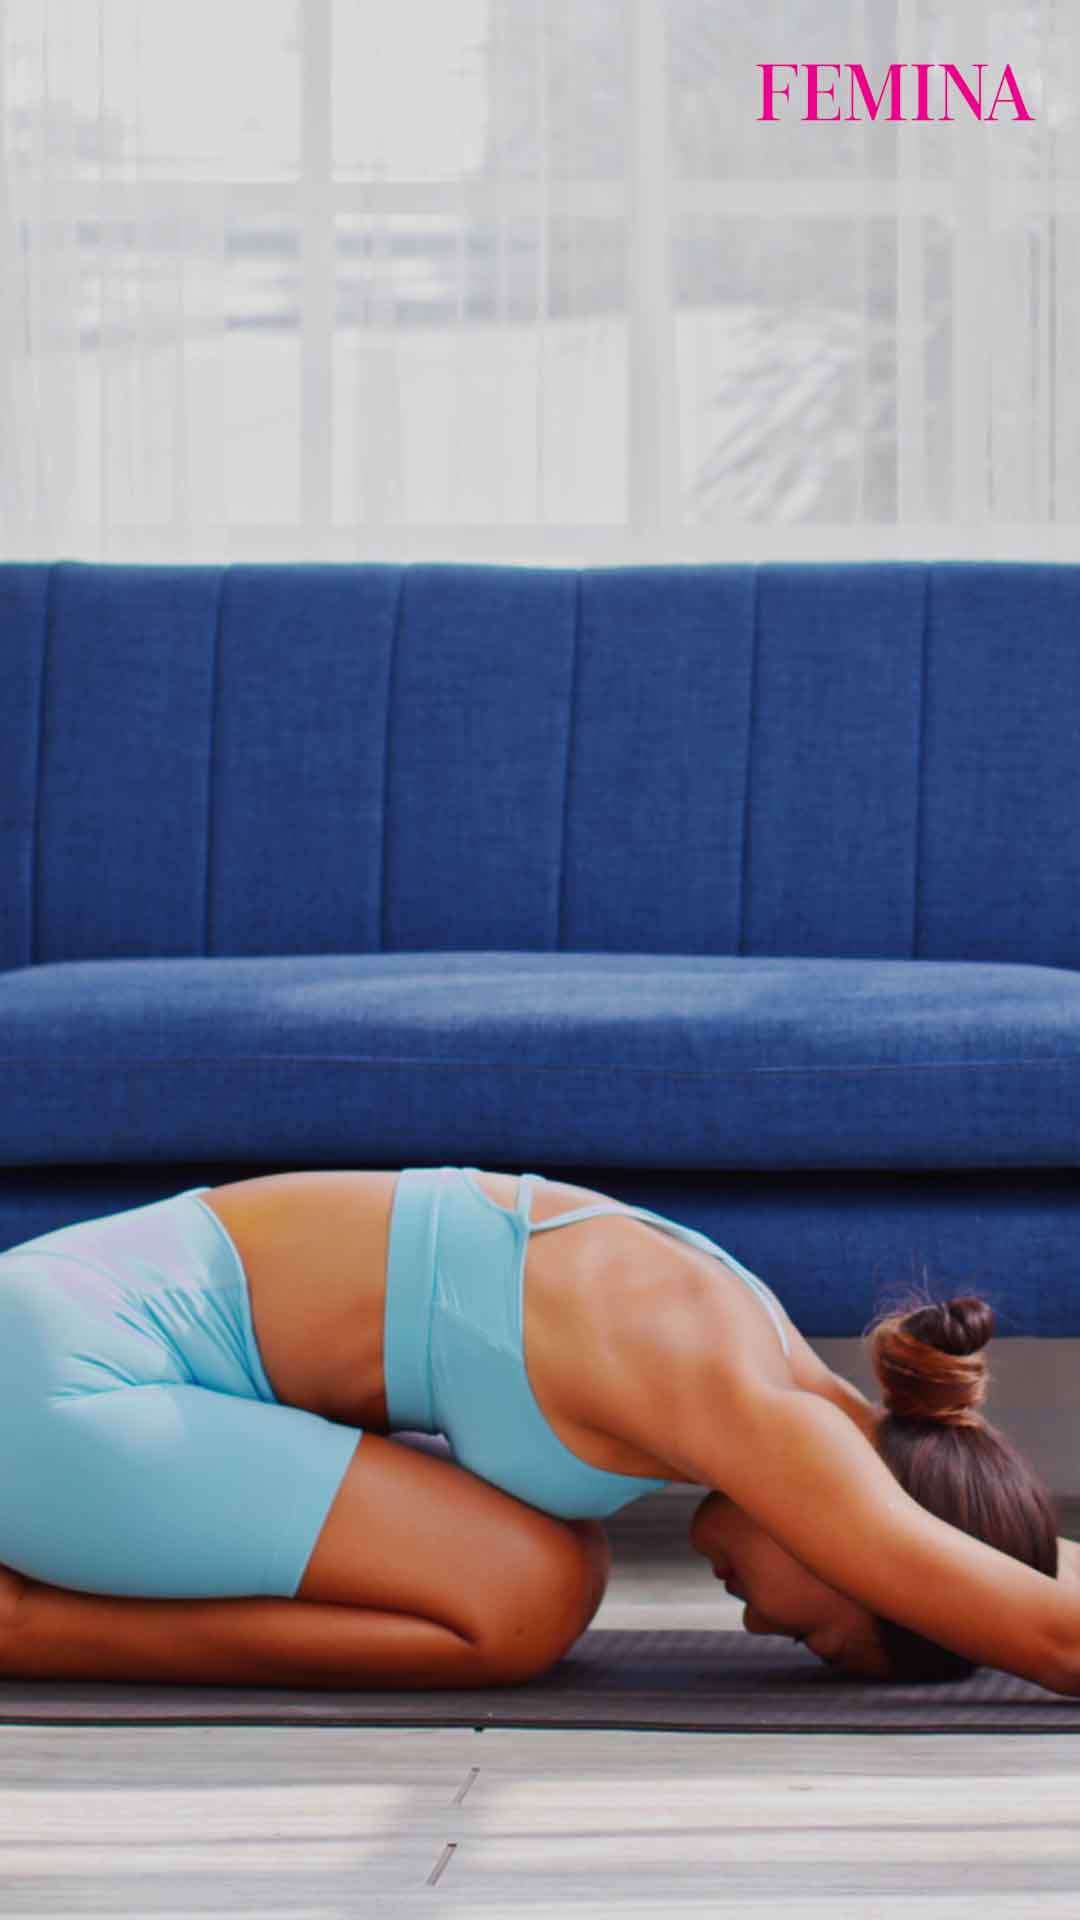 5 yoga poses to regulate your menstrual period l TheHealthSite.com |  TheHealthSite.com